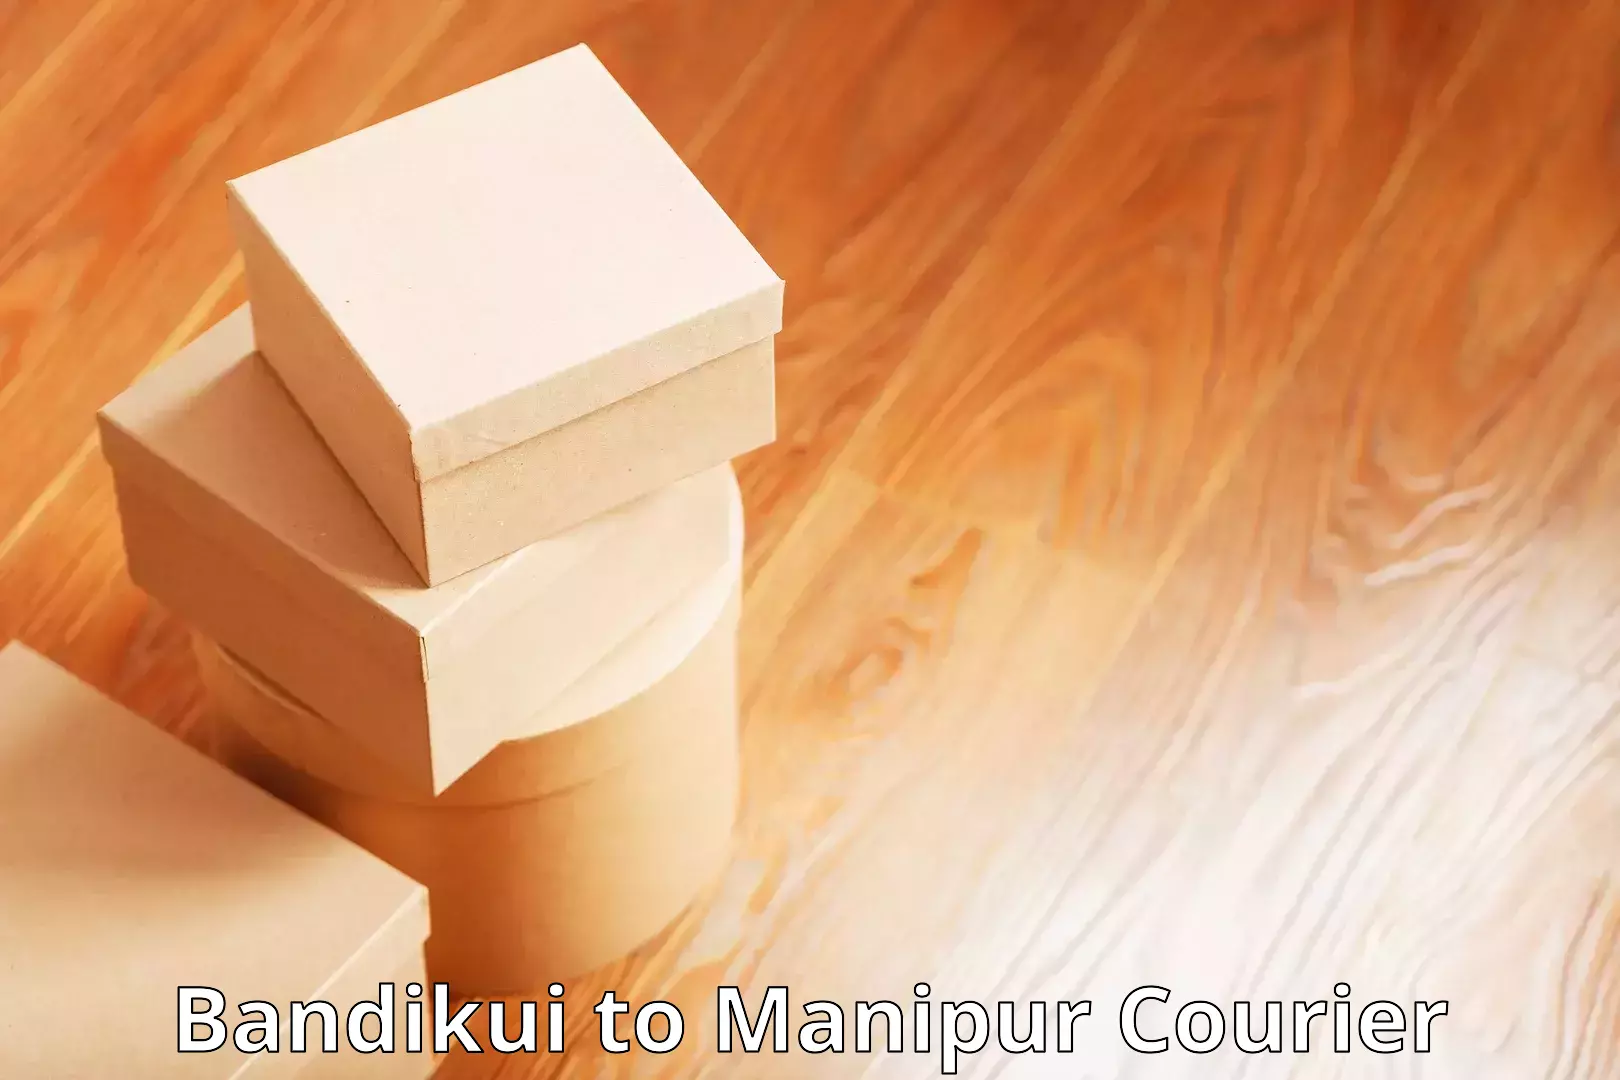 Cash on delivery service Bandikui to Manipur